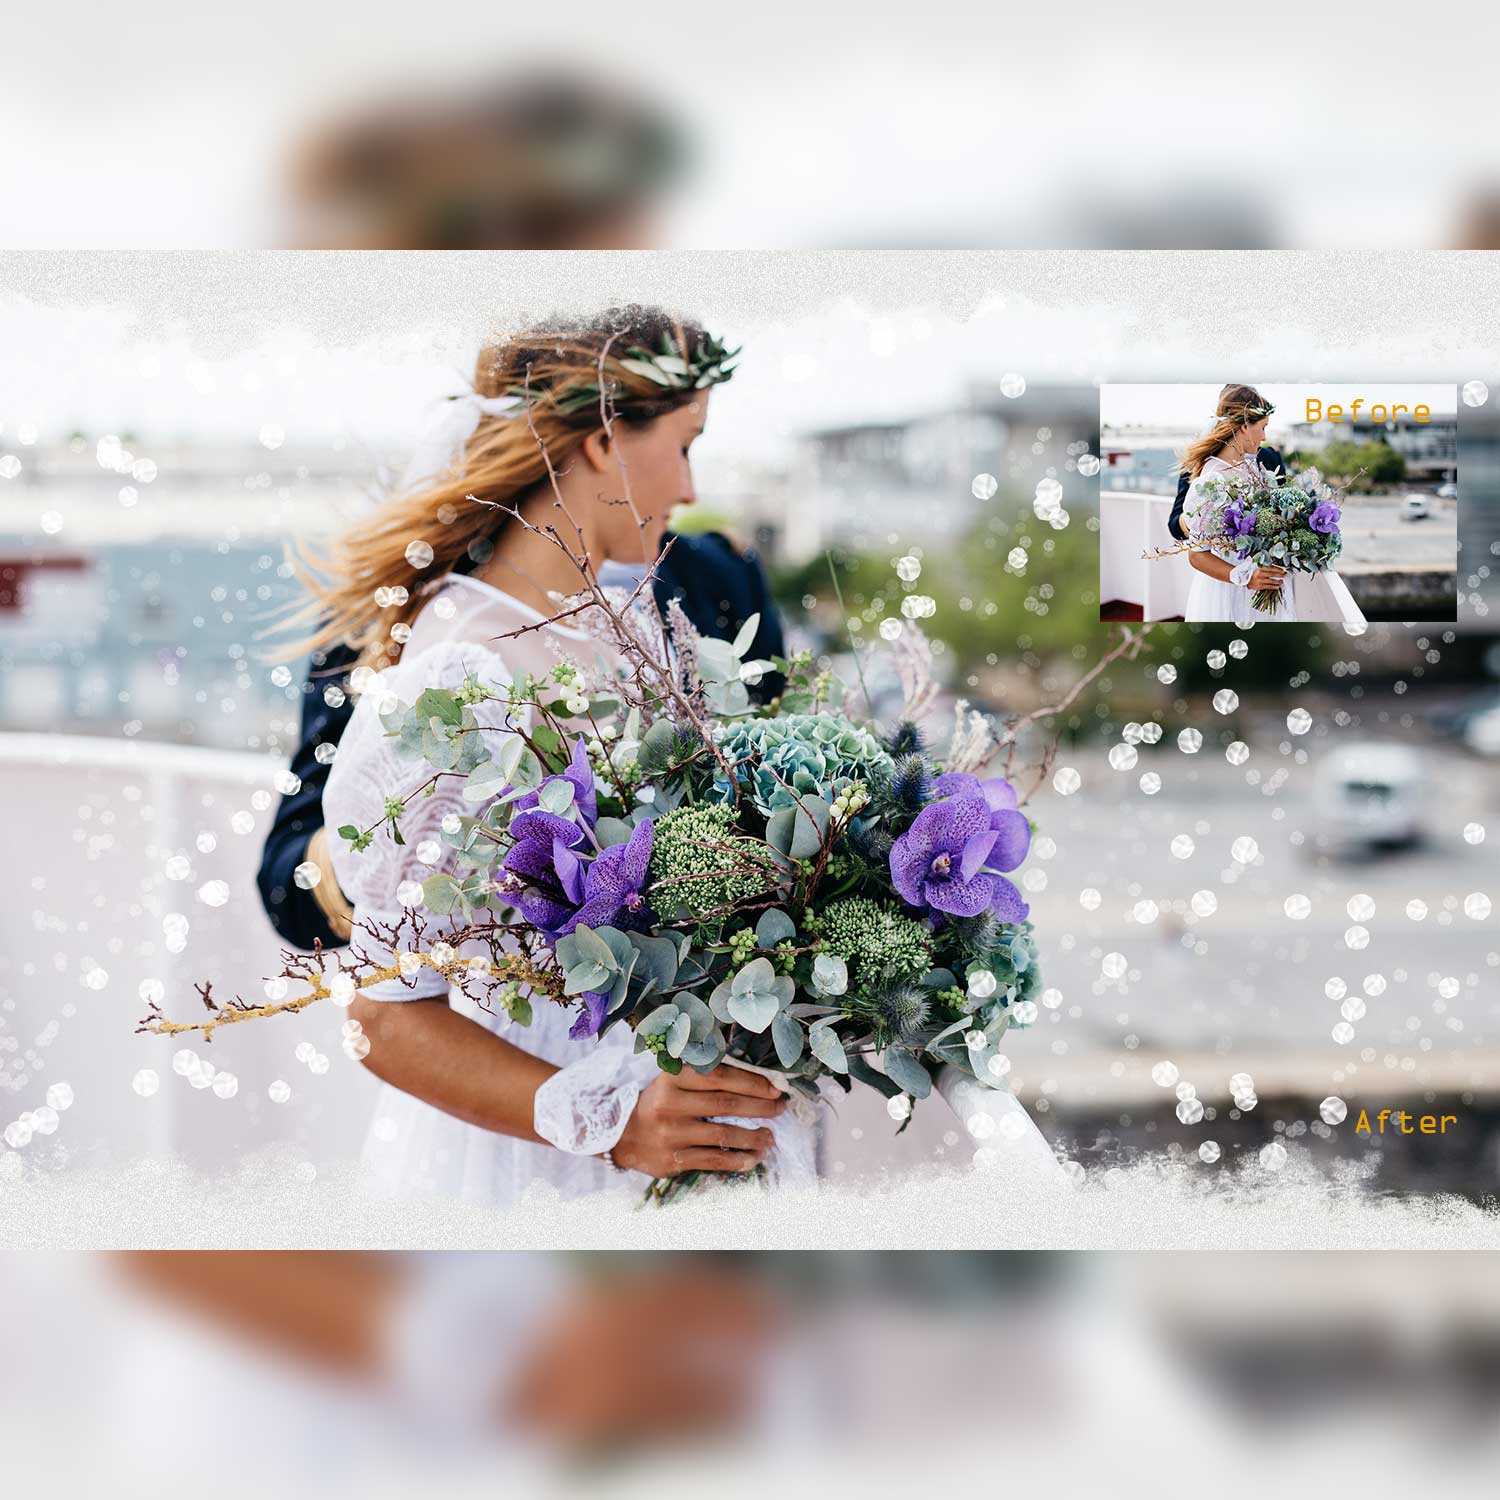 Christmas String Lights Bokeh Photoshop Overlay Bride With Flowers Photo.